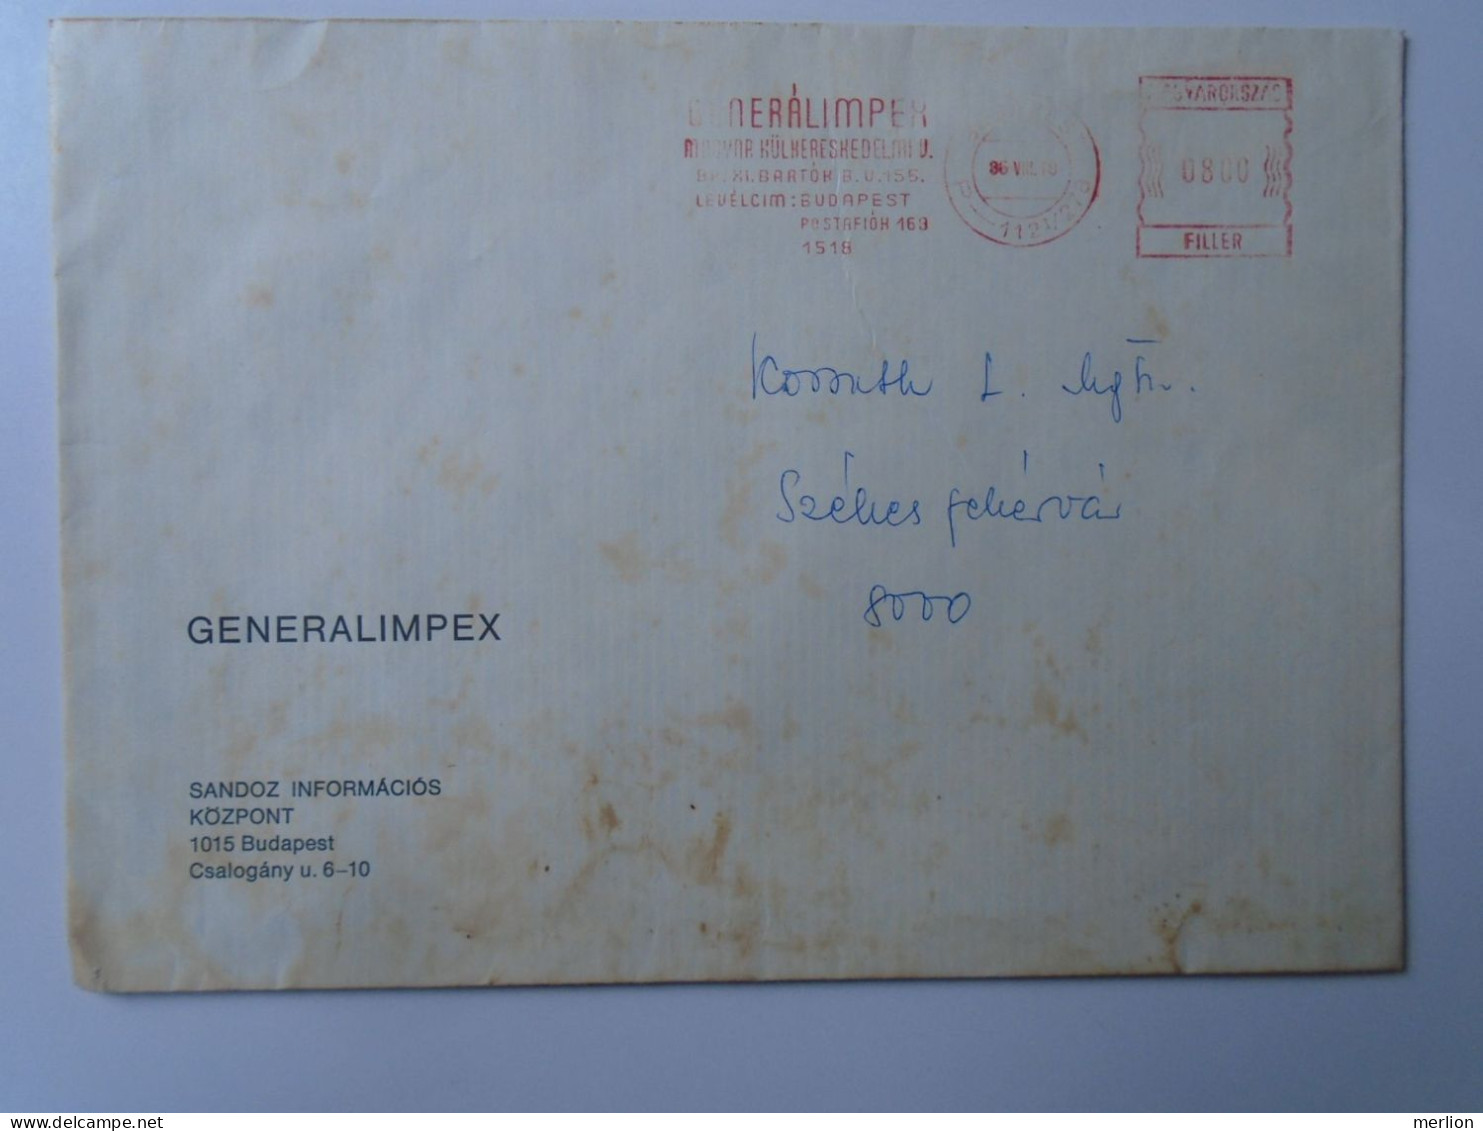 ZA447.8   Hungary ATM / EMA - Freistempel - Red Meter  1986  Large Cover - Generalimpex Budapest Sandoz - Machine Labels [ATM]